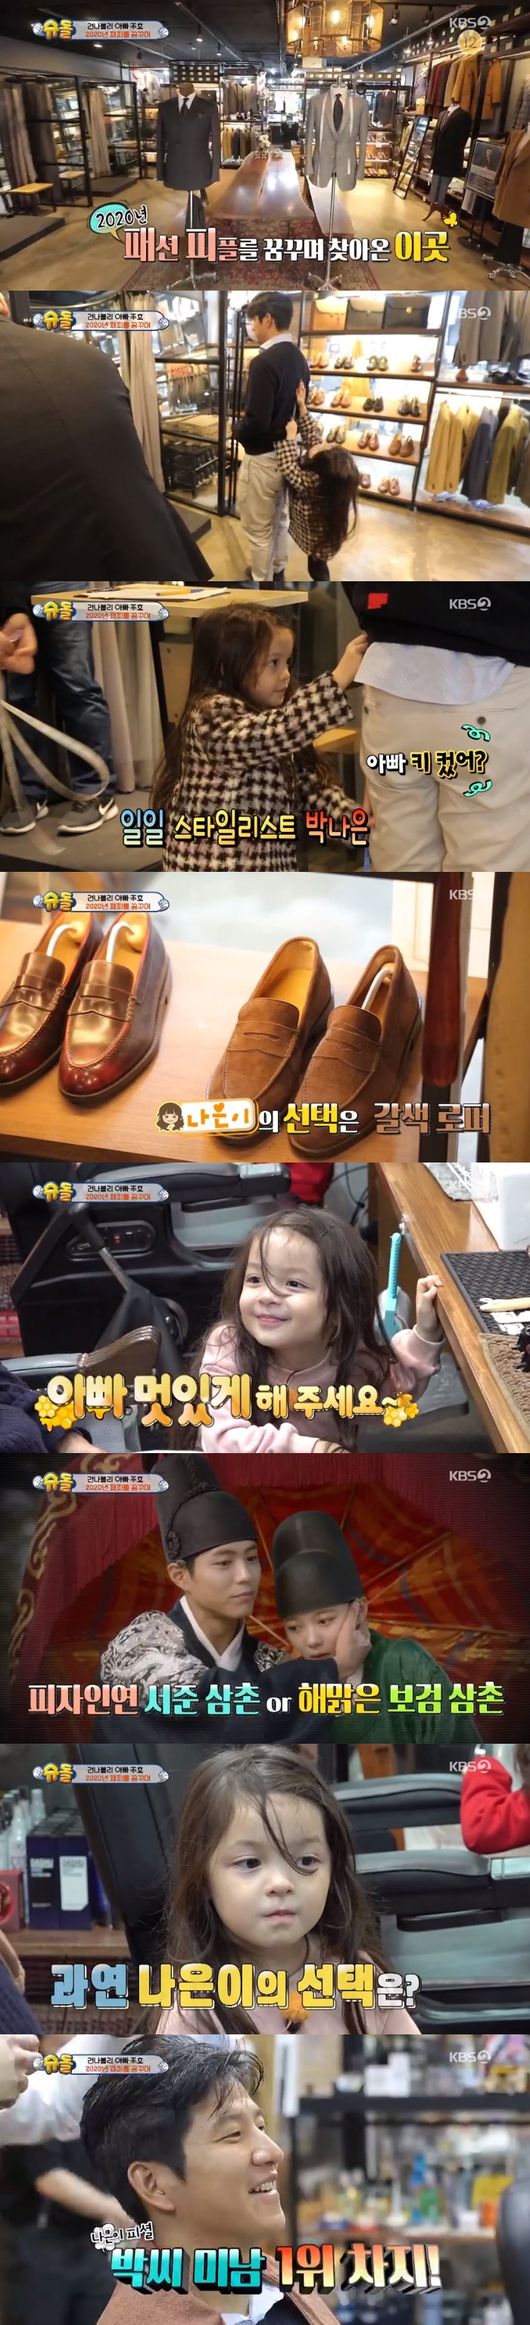 Na-eun has turned into a daily stylist.On the 12th KBS entertainment Superman Returns, Na-euns lovely figure as a stylist of Park Joo-ho was drawn.Park Joo-ho found a Gunnabli and a clothing store on the day, Park Joo-ho said, I have a lot of places to go at the end of the year and I have to go to the year-end awards ceremony.Na-eun turned into a daily stylist, took the dimensions of Park Joo-ho and even picked up the shoes.Park Joo-ho wore shoes that Na-eun picked, and Na-eun said, Will Na-eun buy it?After saying that there was no money, I put the shoes that Park Joo-ho wore on where the new god was and laughed.Then he went to Barber Shop.Na-eun asked the director to make it fader cool and Park Joo-ho wanted a Park Seo-joon, Park Bo-gum style.Na-eun then asked who was cool between the two and Father, so Na-eun said Father and Park Joo-ho was pleased.Na-eun then also turned into a wonderful style.Park Joo-ho accidentally met football player Kim Jin-su on the street and Na-eun said, We Father are cool, right?Im a little over here right now...do you go to the awards ceremony? Have a good day, Kim Jin-su replied.Superman returns to capture broadcast screen